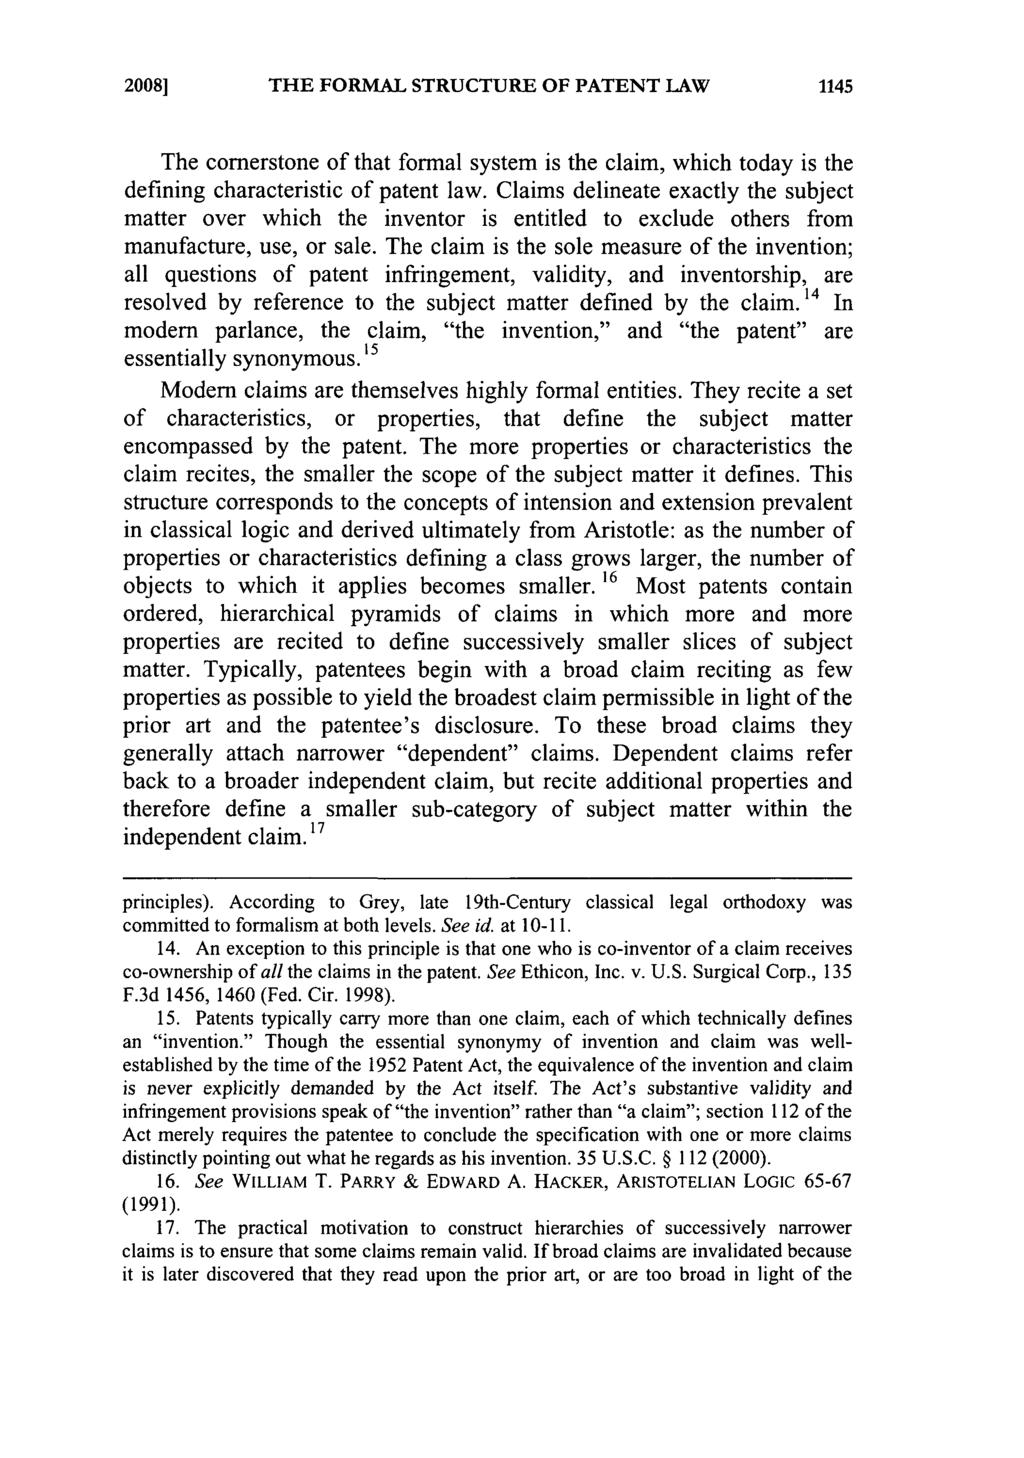 2008] THE FORMAL STRUCTURE OF PATENT LAW The cornerstone of that formal system is the claim, which today is the defining characteristic of patent law.